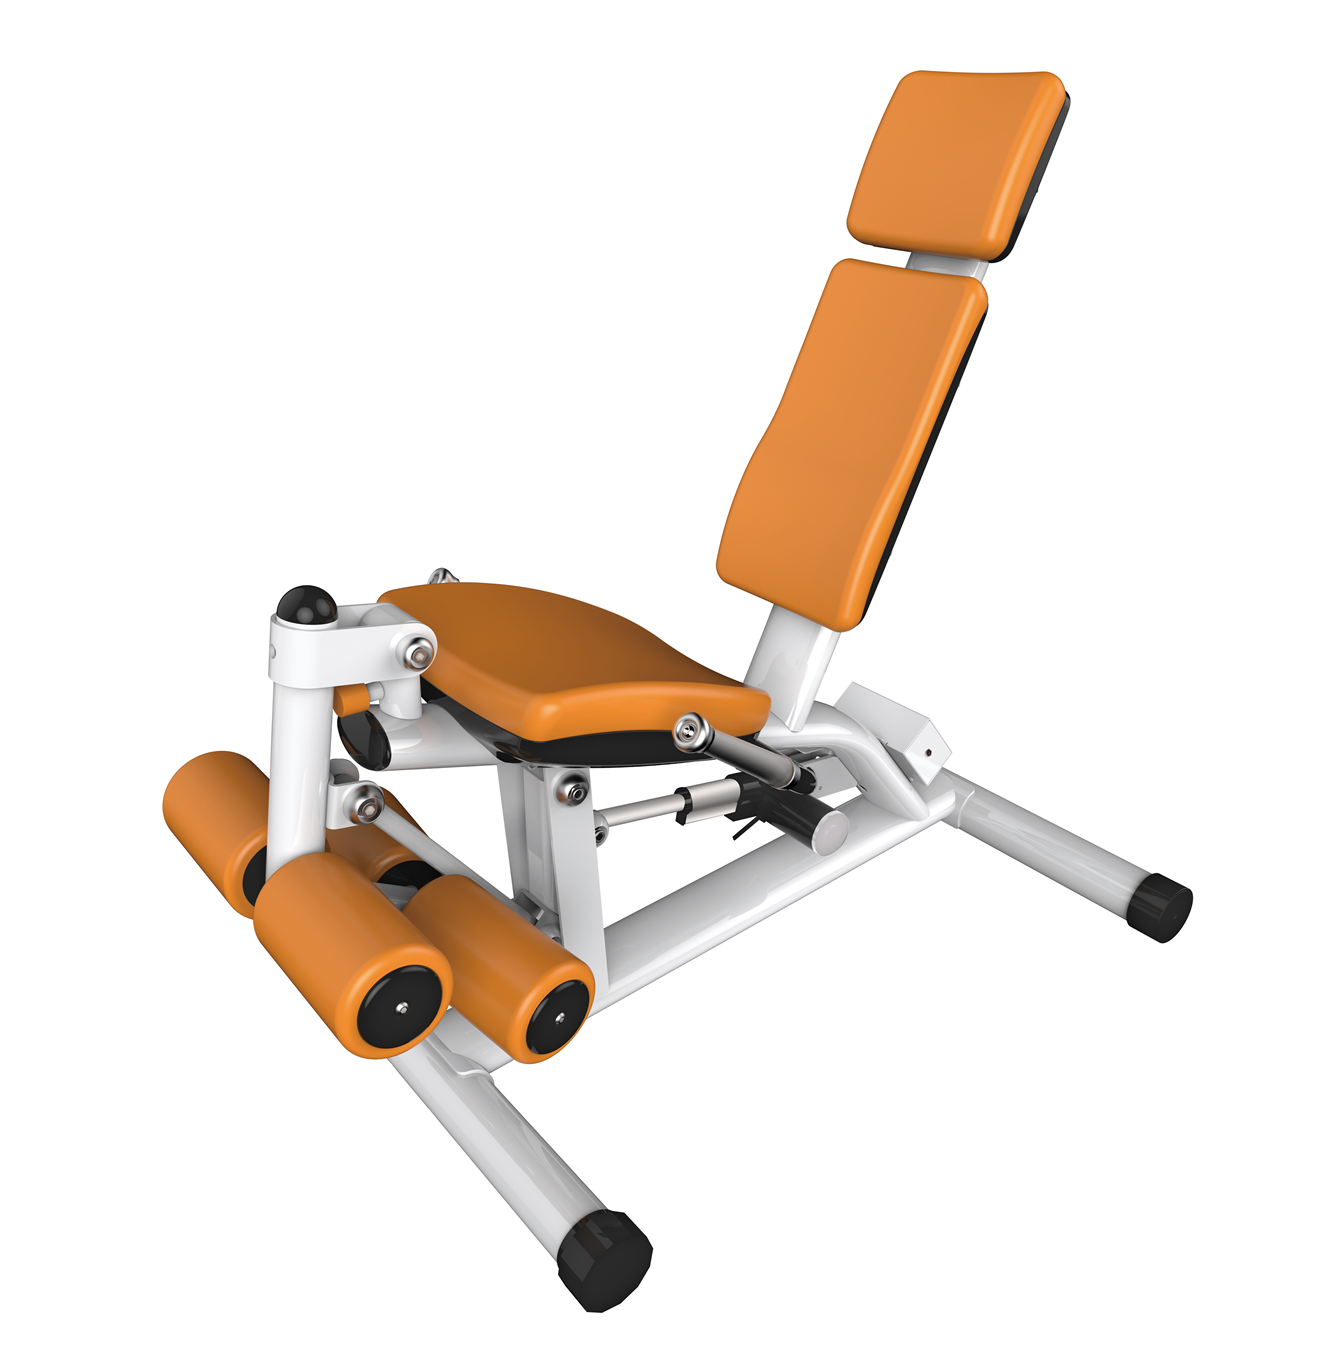 IRKF1606 leg flexion and extension training device